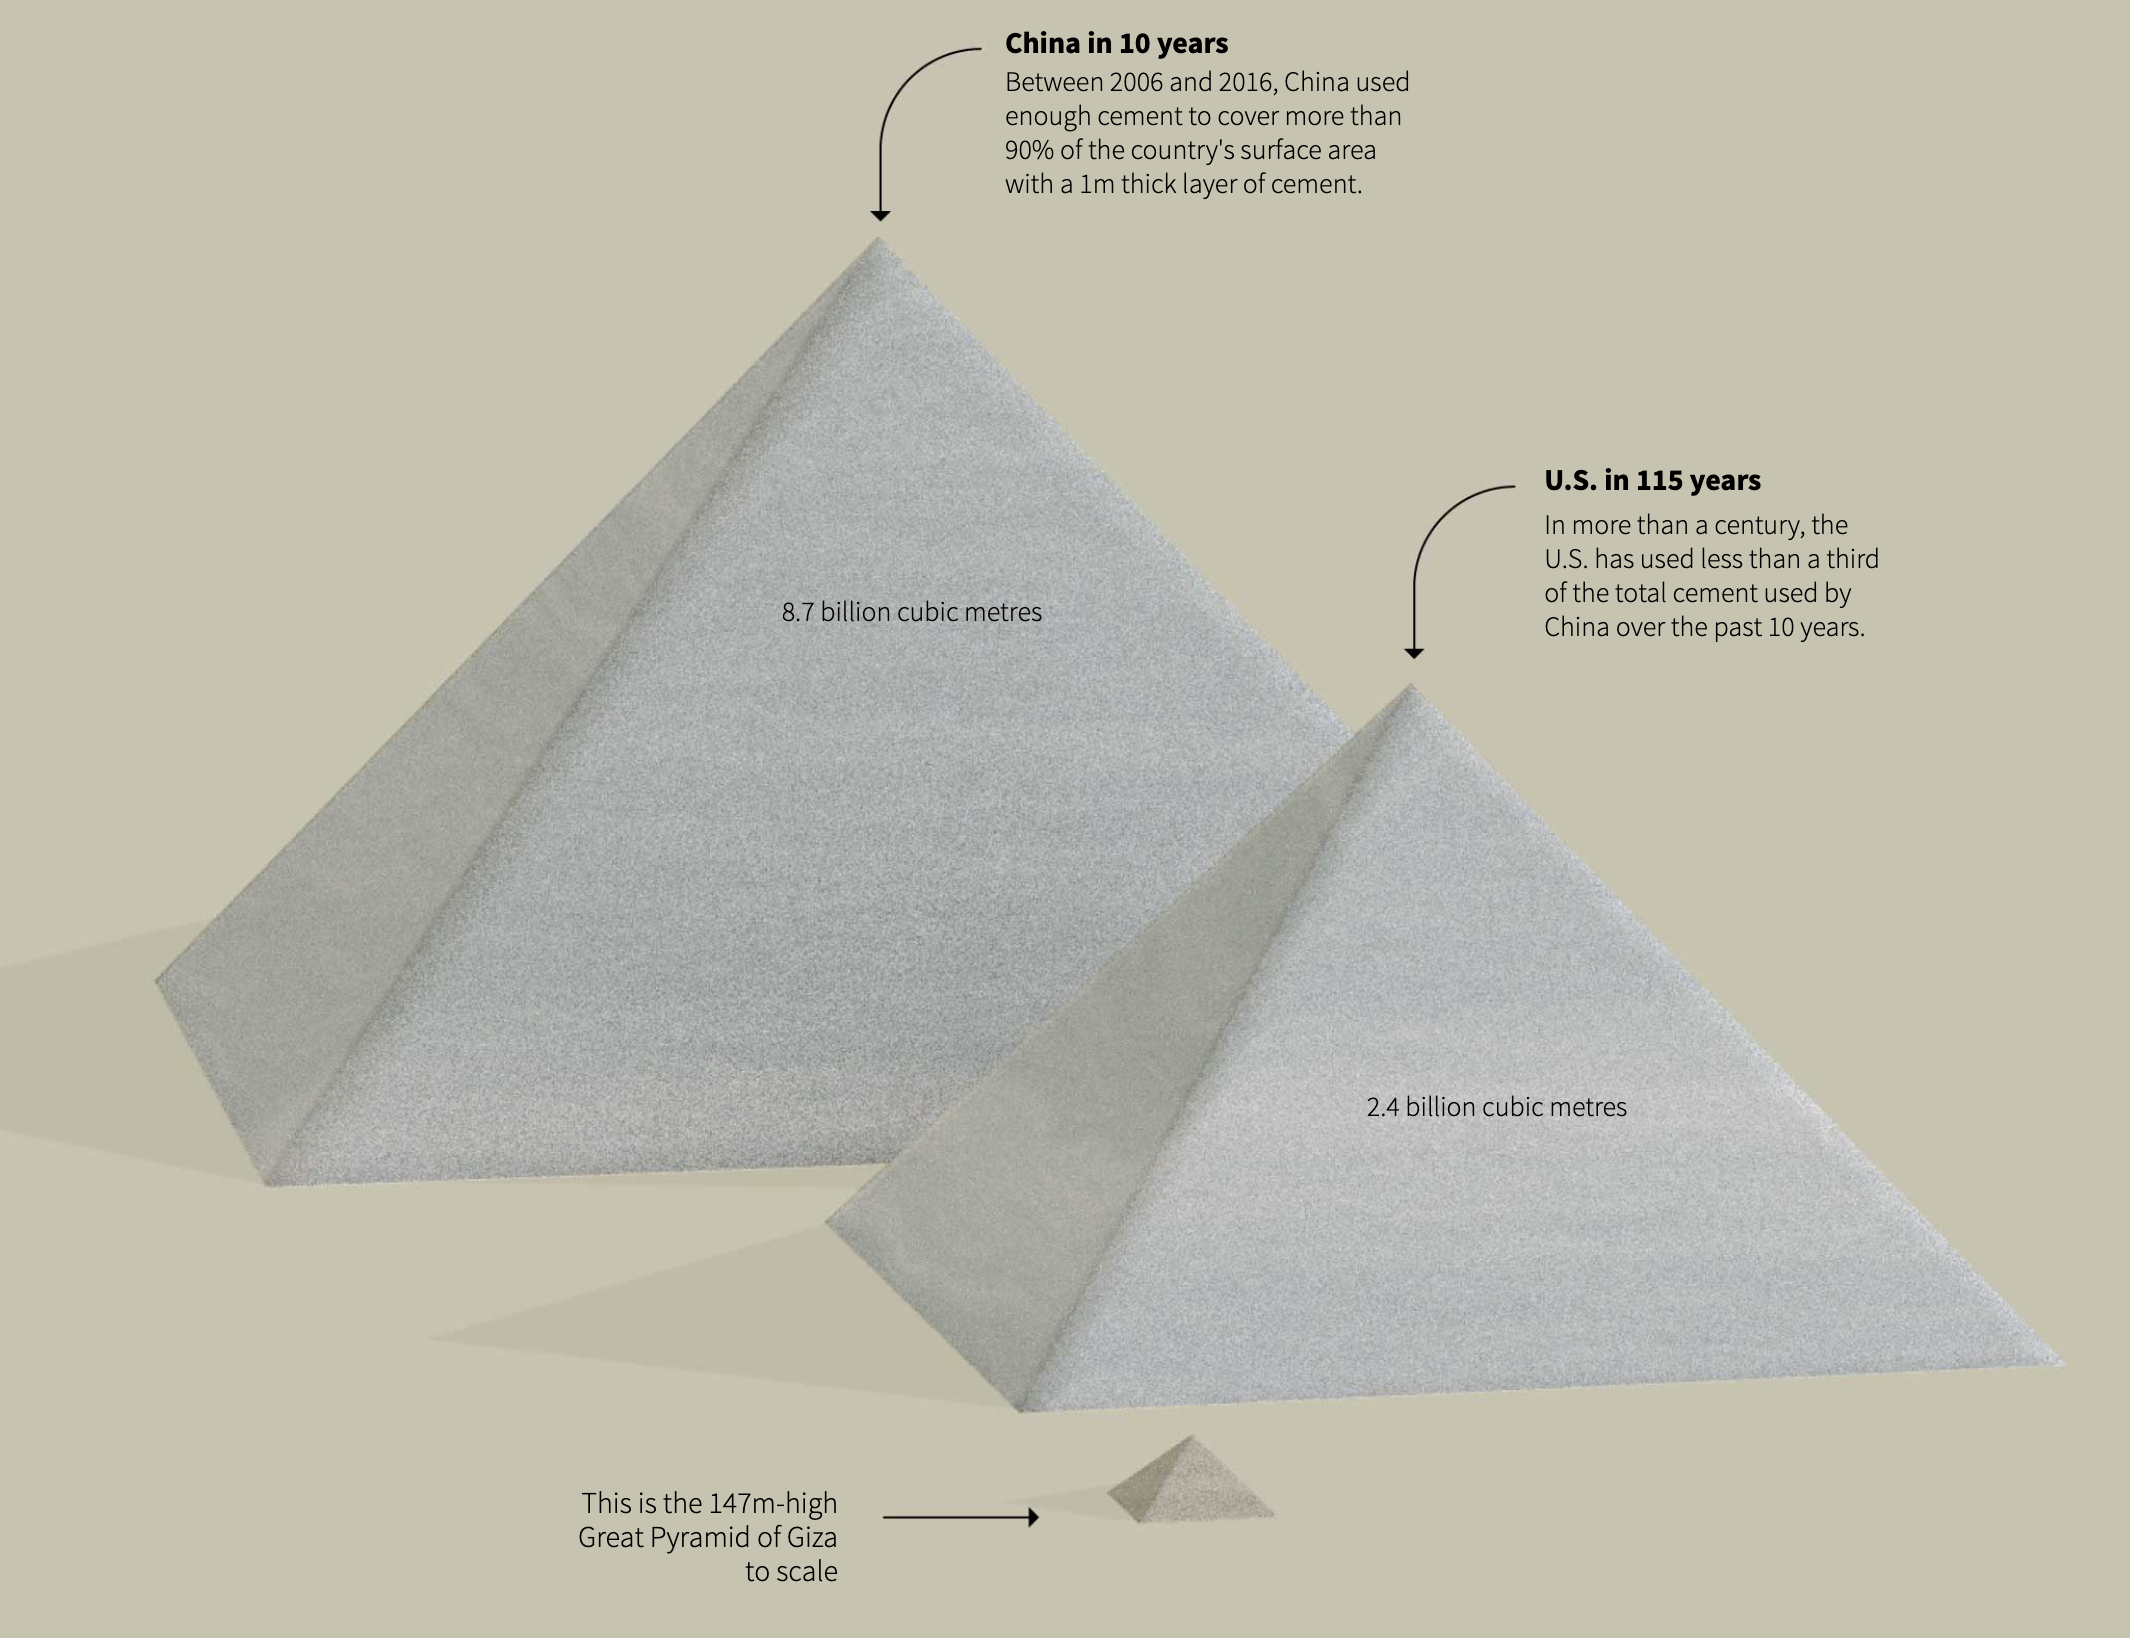 The amount of cement used in China in 10 years and in the US in 115 years visualised as a pyramid and compared with the Great Pyramid of Giza